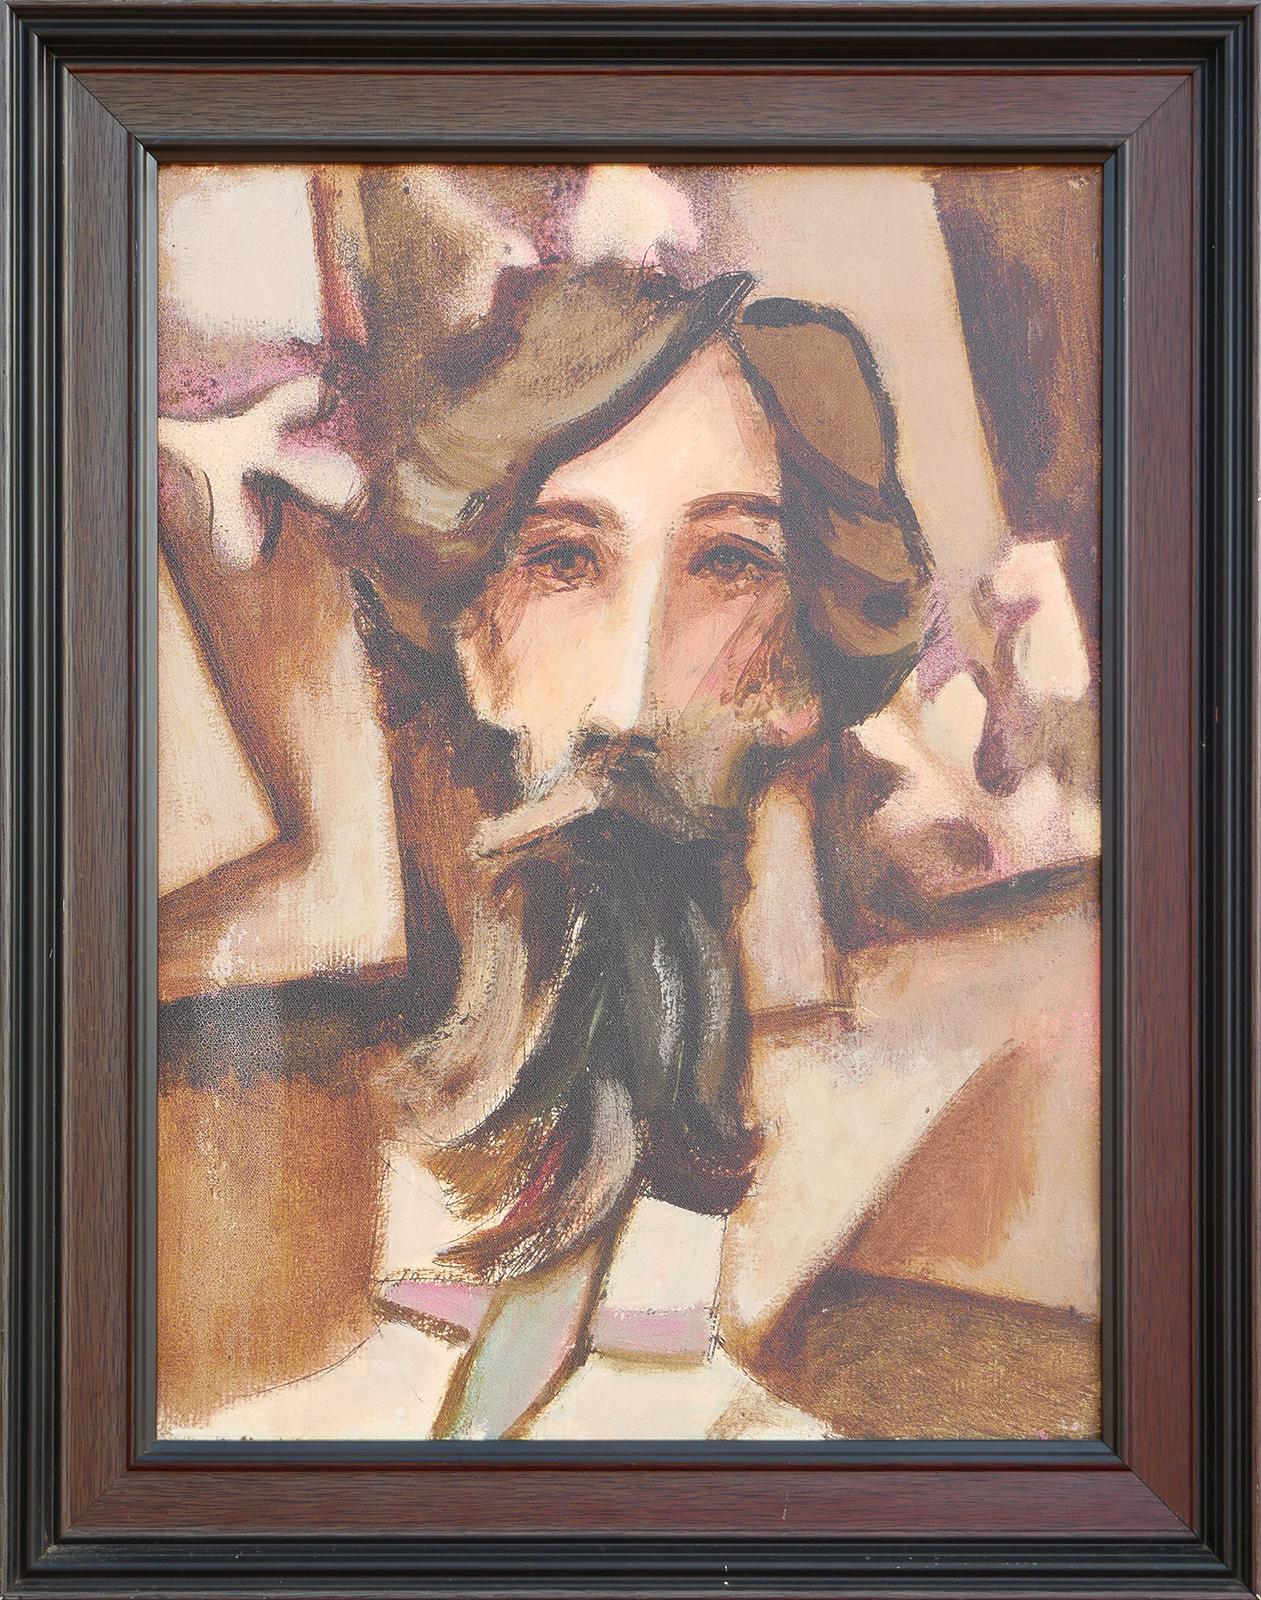 Modern abstract figurative portrait print by Houston, TX artist David Adickes. The work features a central bearded male figure dressed in a tie set against a background of falling leaves. Currently hung a decorative brown frame.

Dimensions Without